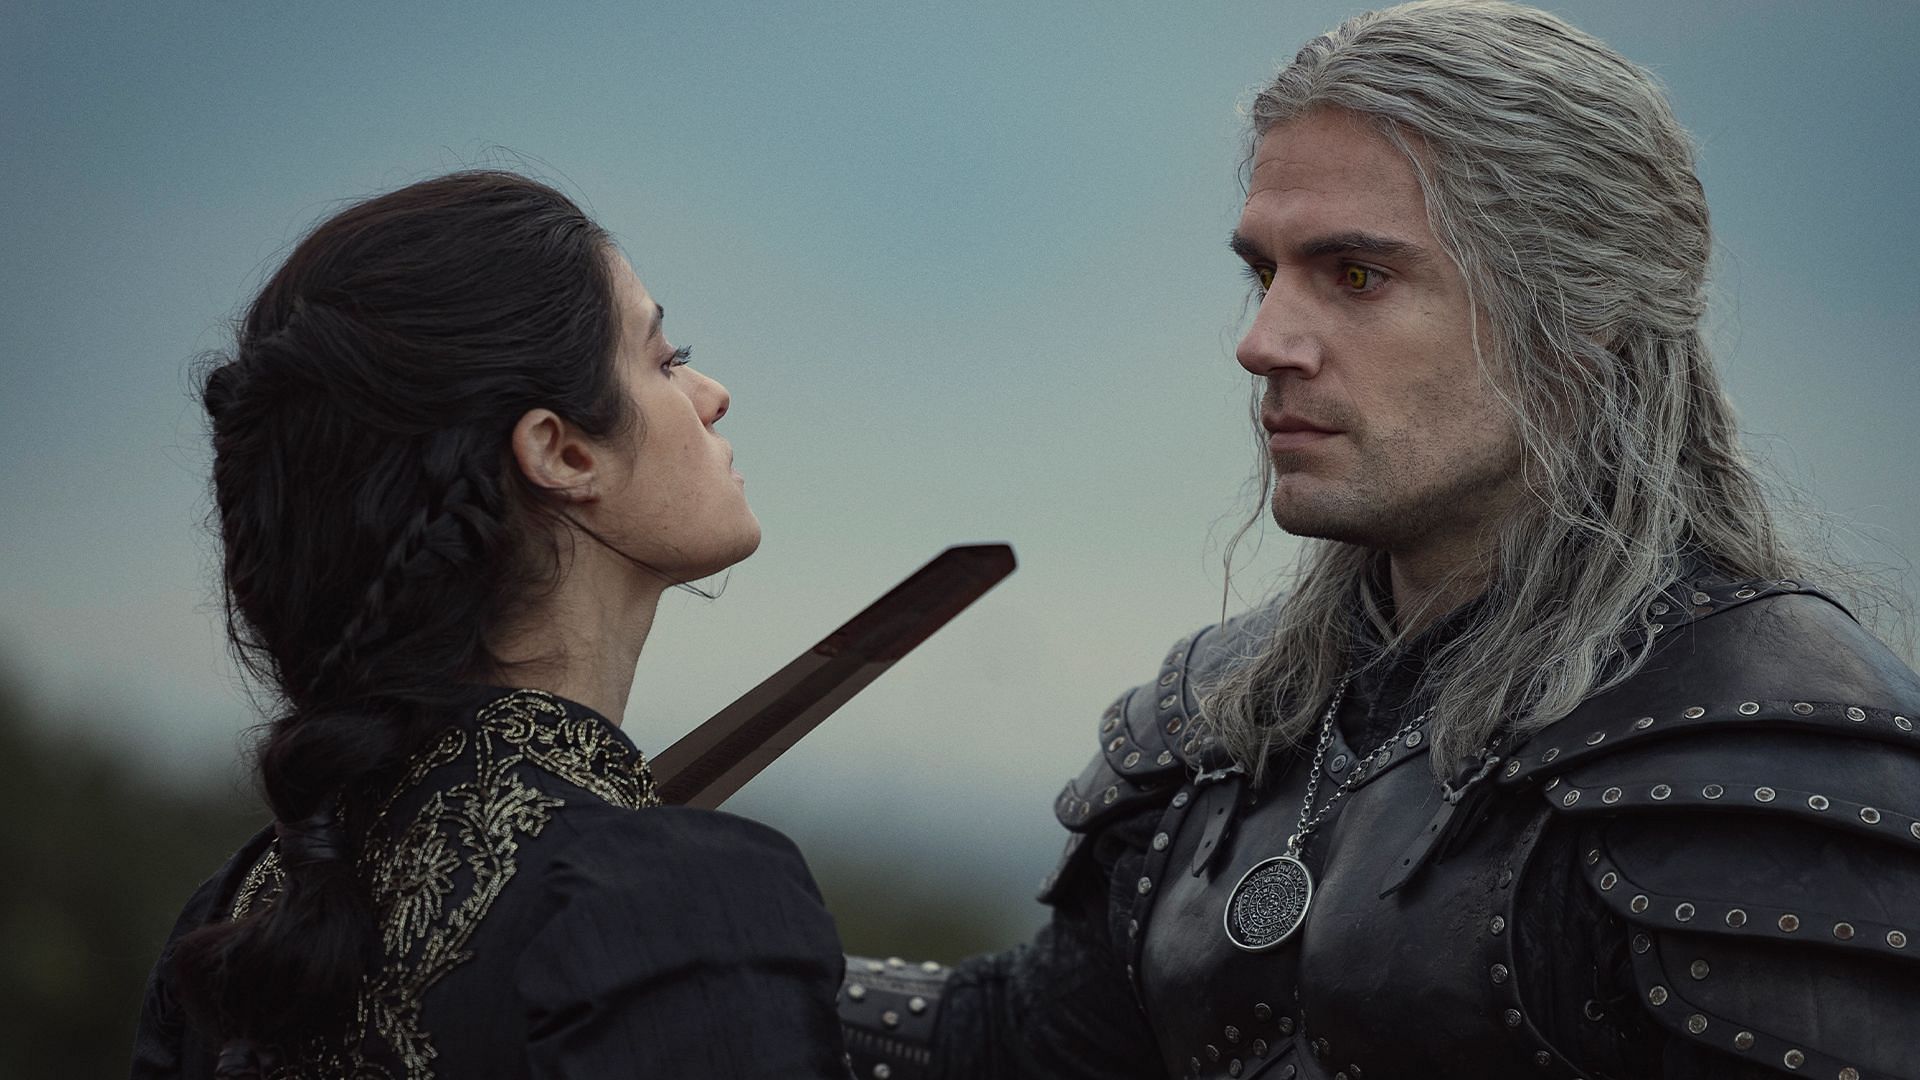 The Witcher season 3 ending: Henry Cavill's Geralt goes down fighting